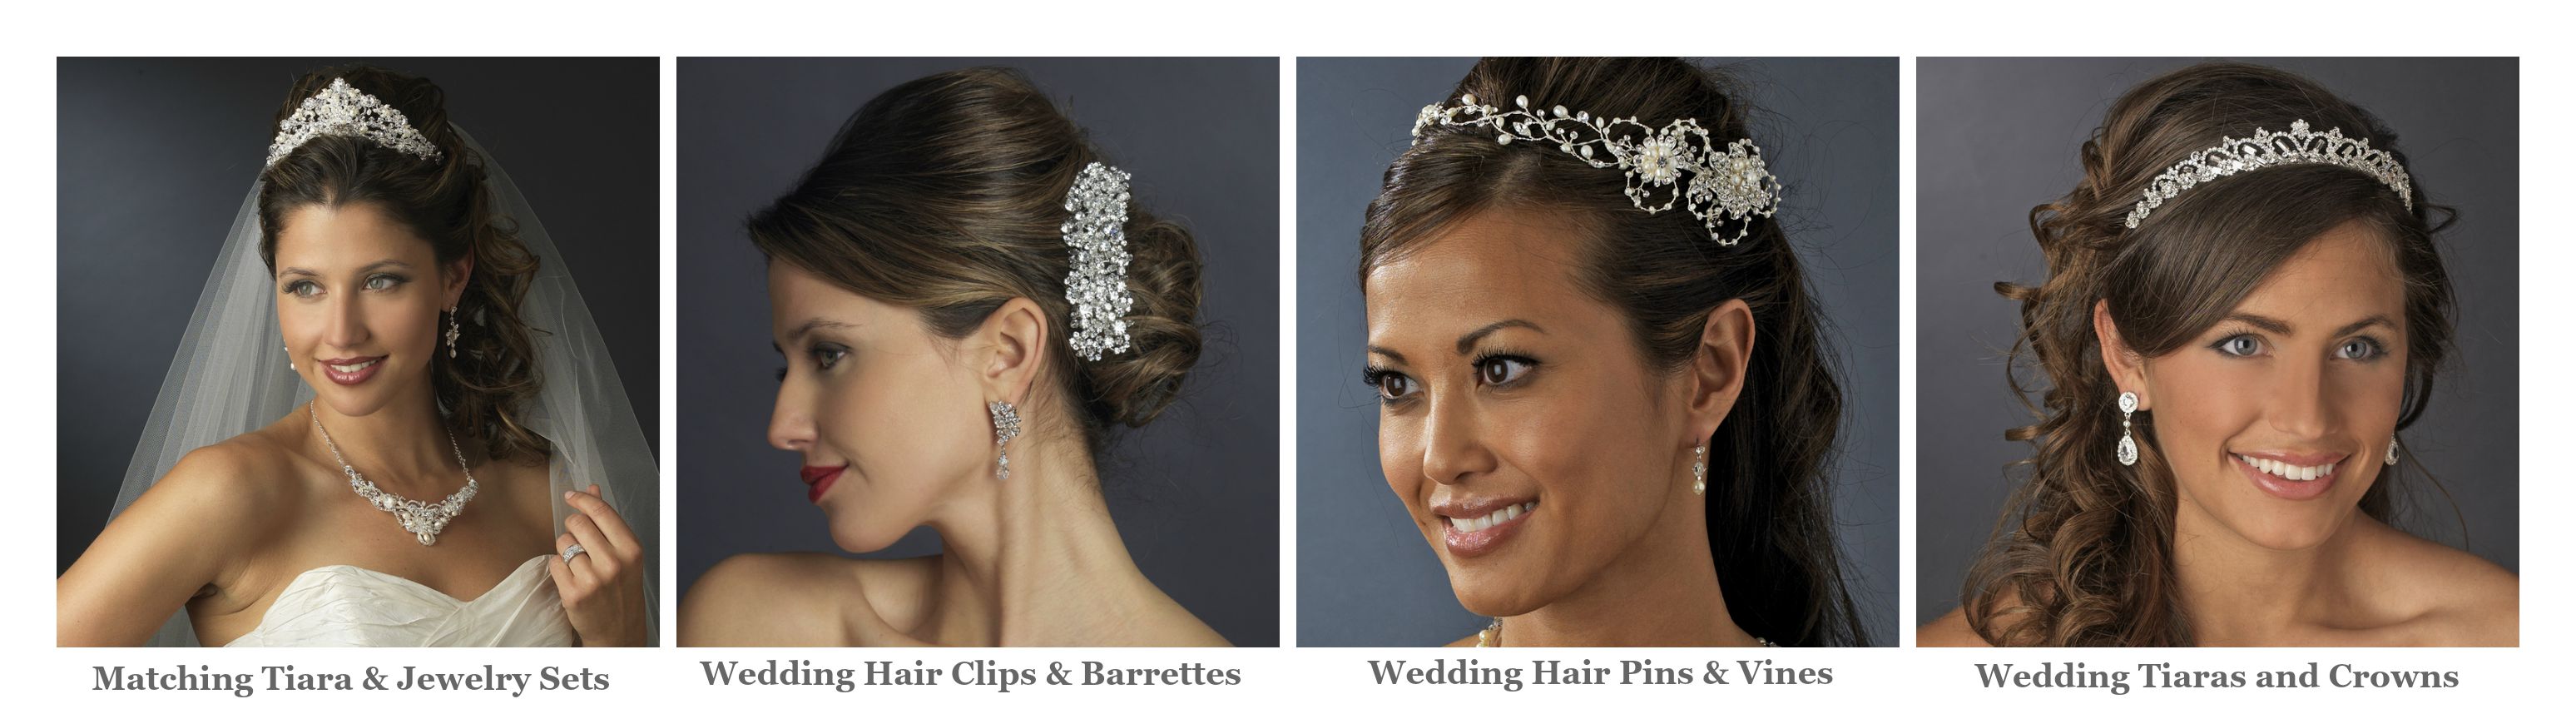 Bridal Hair Accessory Trends